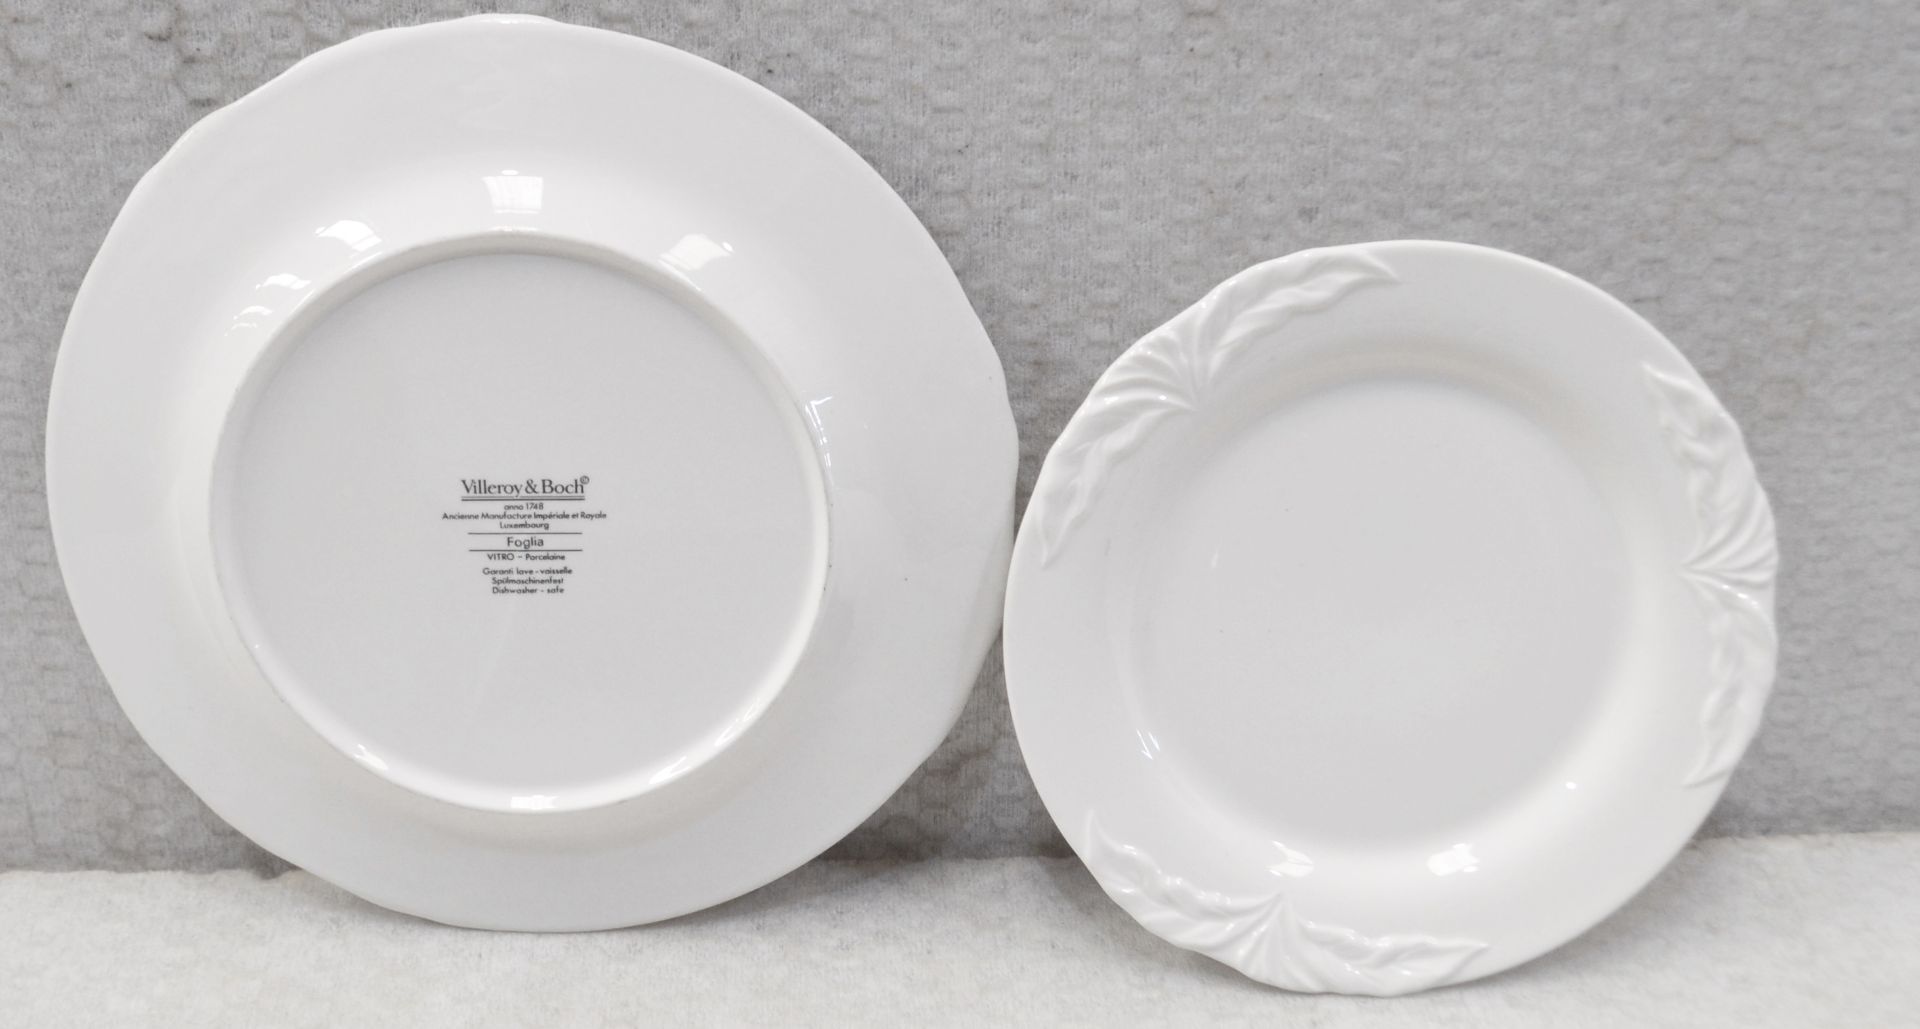 1 x Assorted Collection of Fourteen Villeroy & Boch Foglia Tea/Side/Bread & Butter Plates - Image 2 of 3